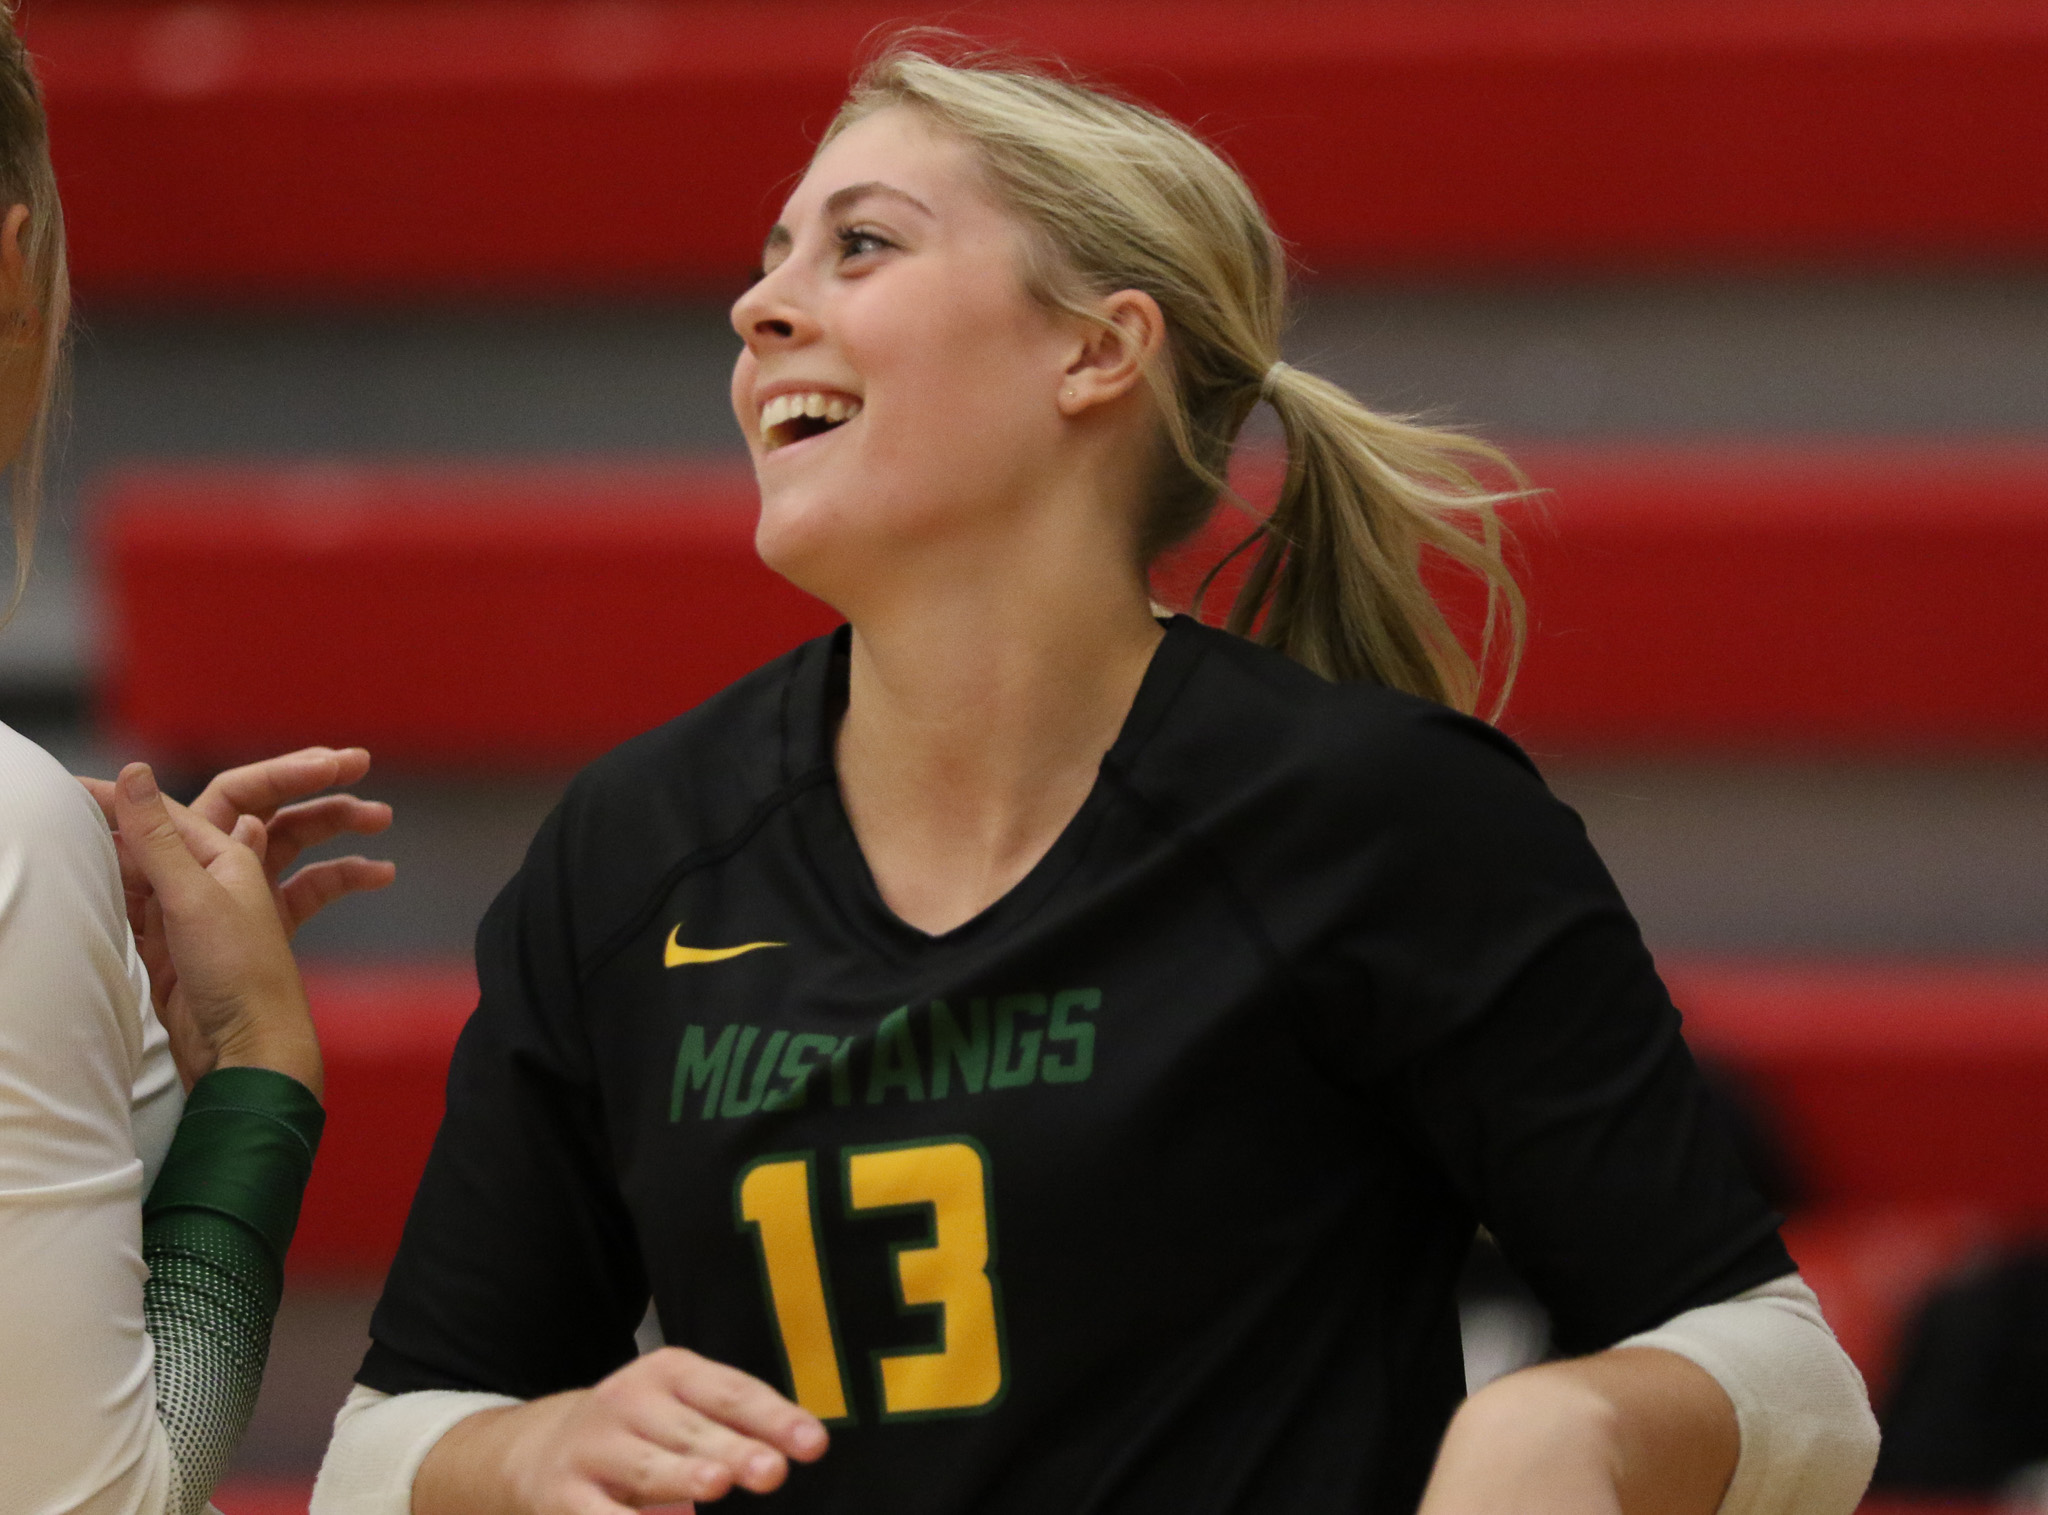 <span class="pn-tooltip pn-player-link">
        <span class="name-pointer">Scouting Report: Dubuque Hempstead-City High</span>
        <span class="info-box not-prose" style="background: linear-gradient(to bottom, rgba(23,90,170, 0.95) 0%,rgba(23,90,170, 1) 100%)">
            <a href="https://prepdig.com/2023/08/scouting-report-dubuque-hempstead-city-high/" class="link-wrap">
                                    <span class="player-img"><img src="https://prepdig.com/wp-content/uploads/sites/5/2023/08/137A9172-2.jpg?w=150&h=150&crop=1" alt="Scouting Report: Dubuque Hempstead-City High"></span>
                
                <span class="player-details">
                    <span class="first-name">Scouting</span>
                    <span class="last-name">Report: Dubuque Hempstead-City High</span>
                    <span class="measurables">
                                            </span>
                                    </span>
                <span class="player-rank">
                                                        </span>
                                    <span class="state-abbr"></span>
                            </a>

            
        </span>
    </span>
